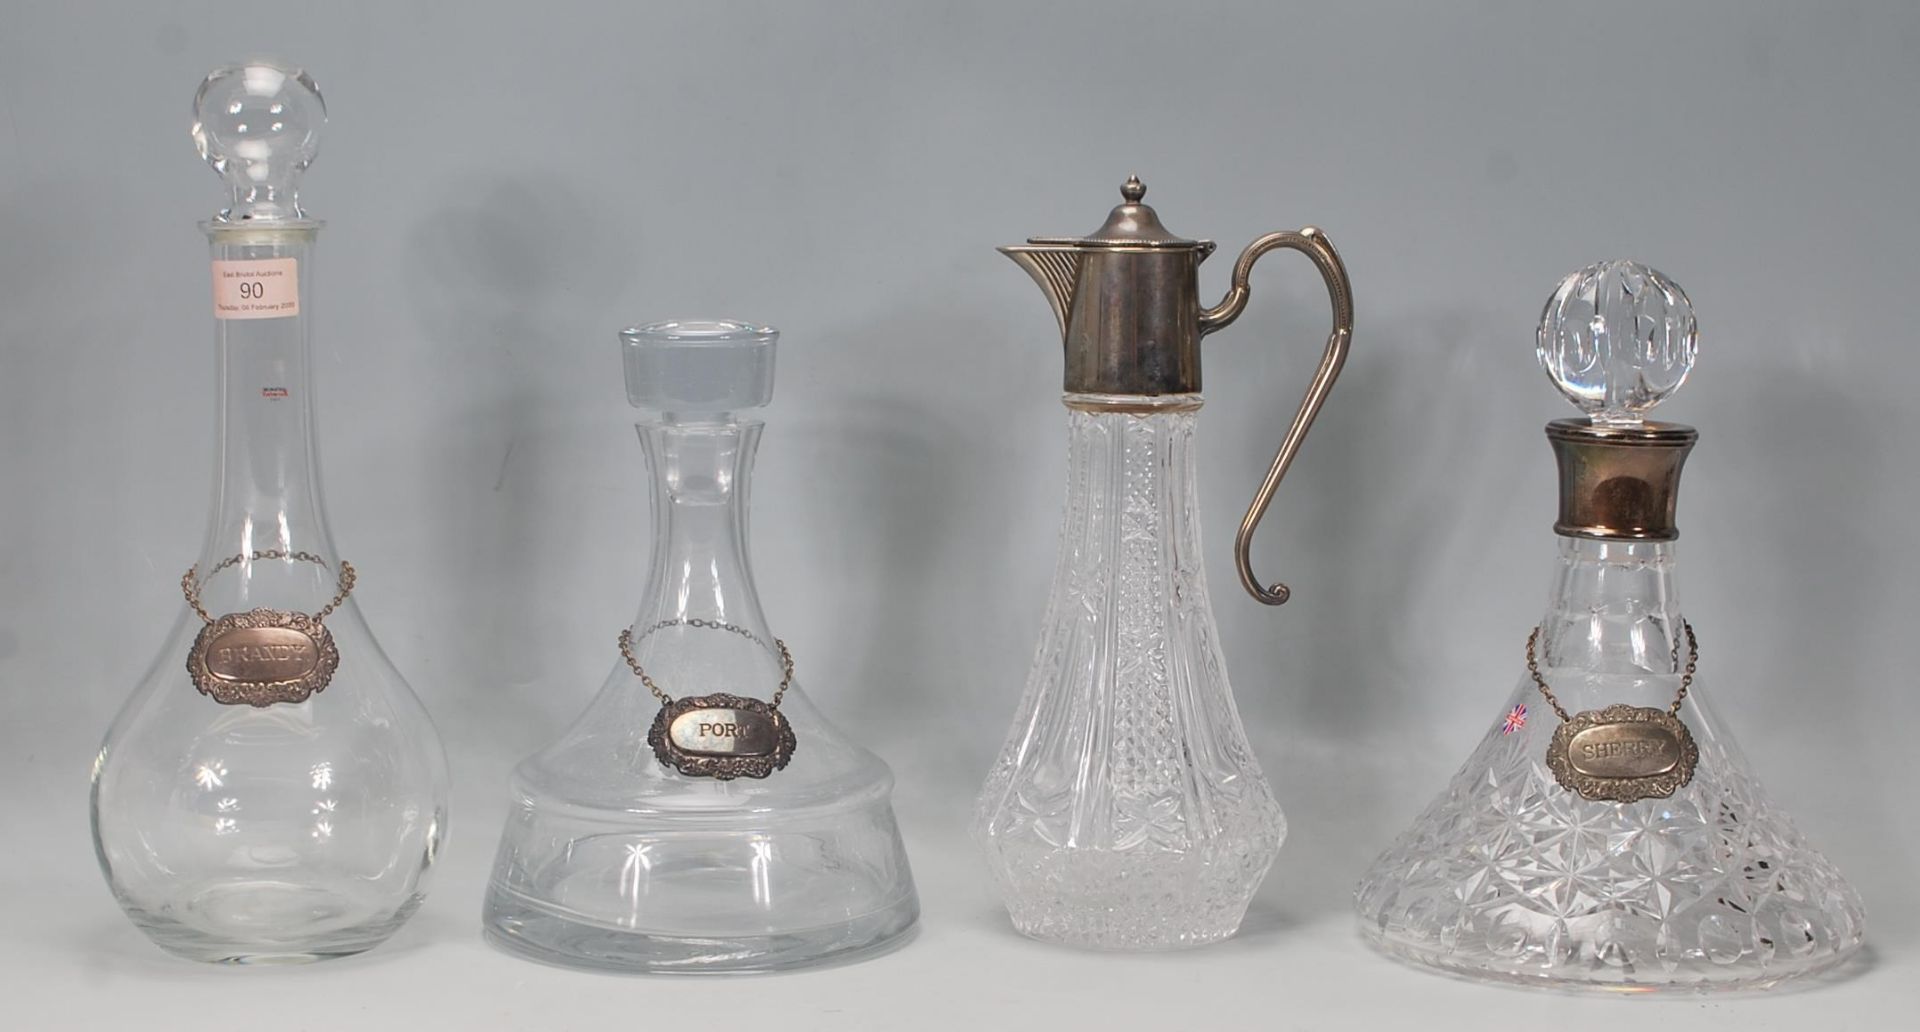 A group of four 20th century glass decanters, to include two plain glass decanters with stoppers and